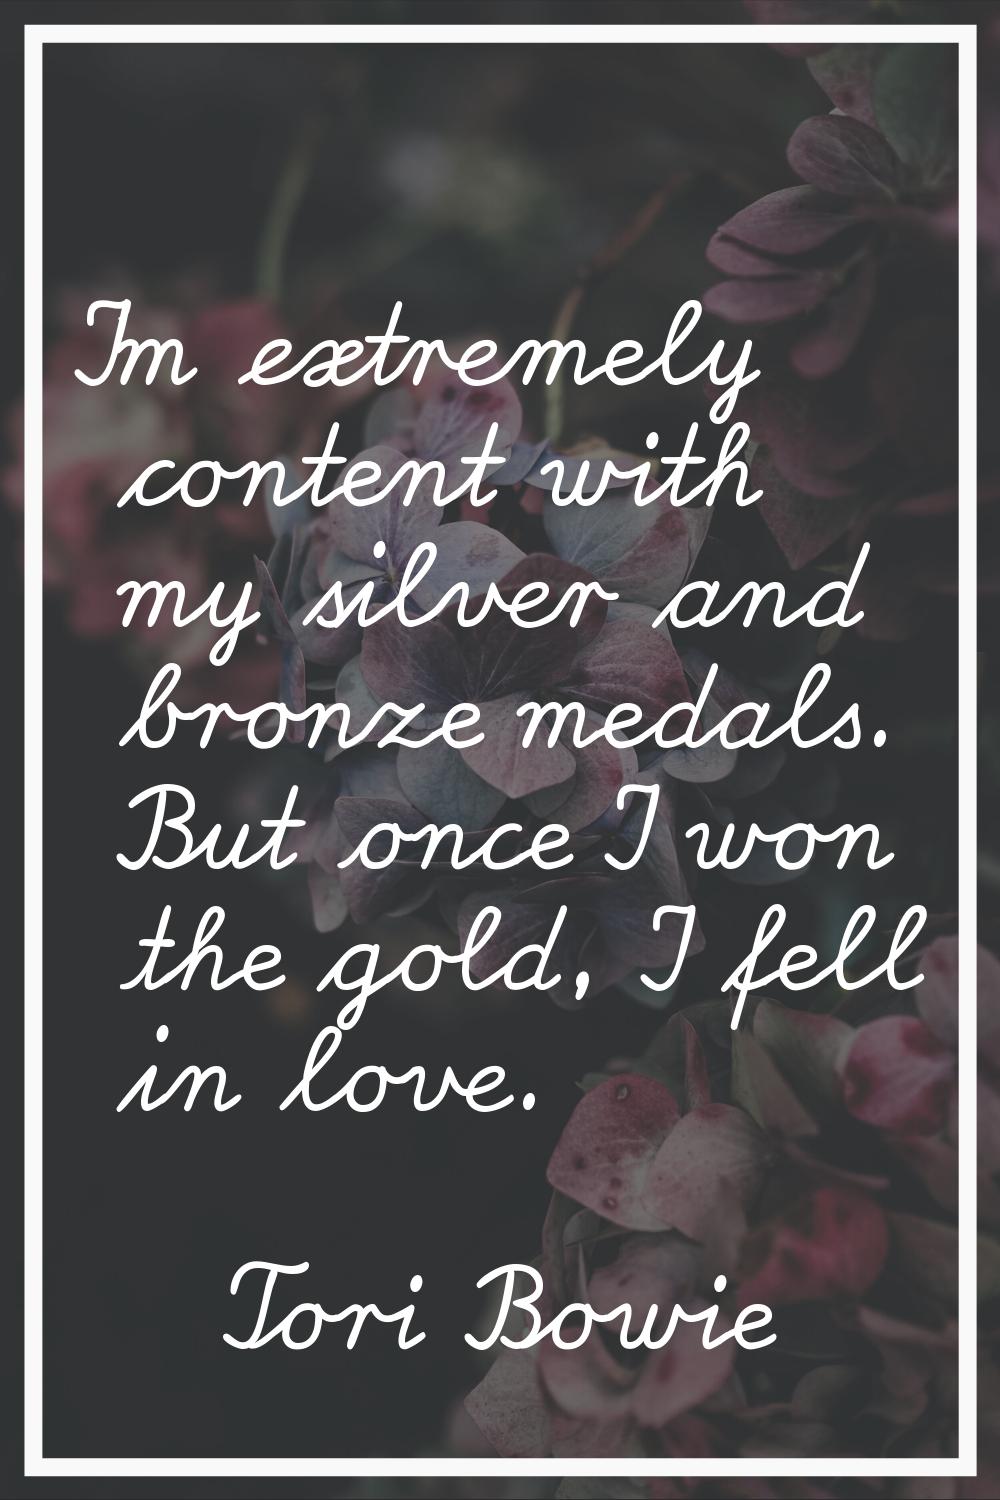 I'm extremely content with my silver and bronze medals. But once I won the gold, I fell in love.